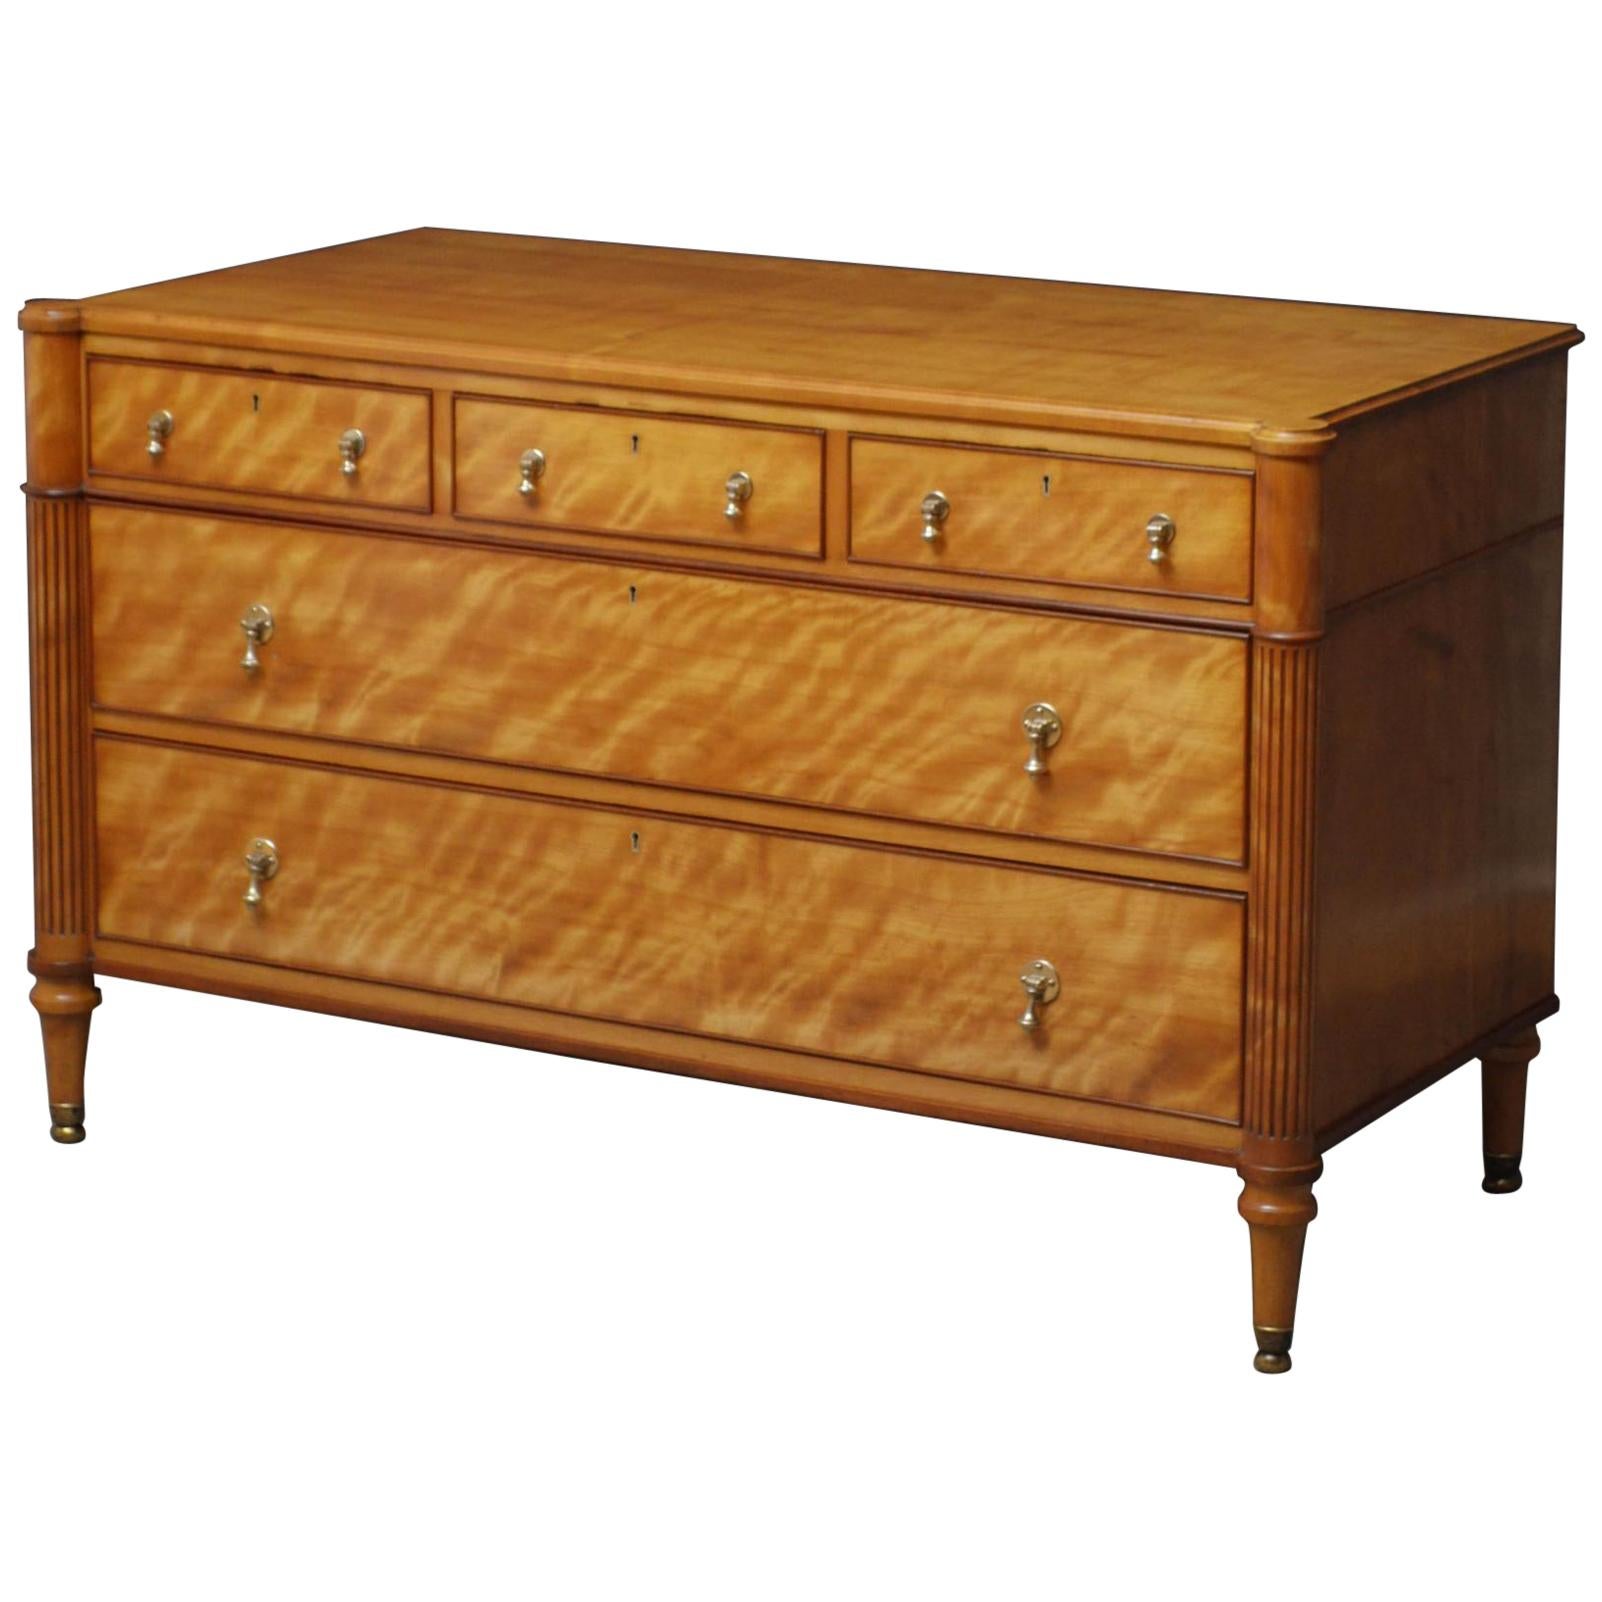 Late 19th Century English Chest of Drawers in Satinwood